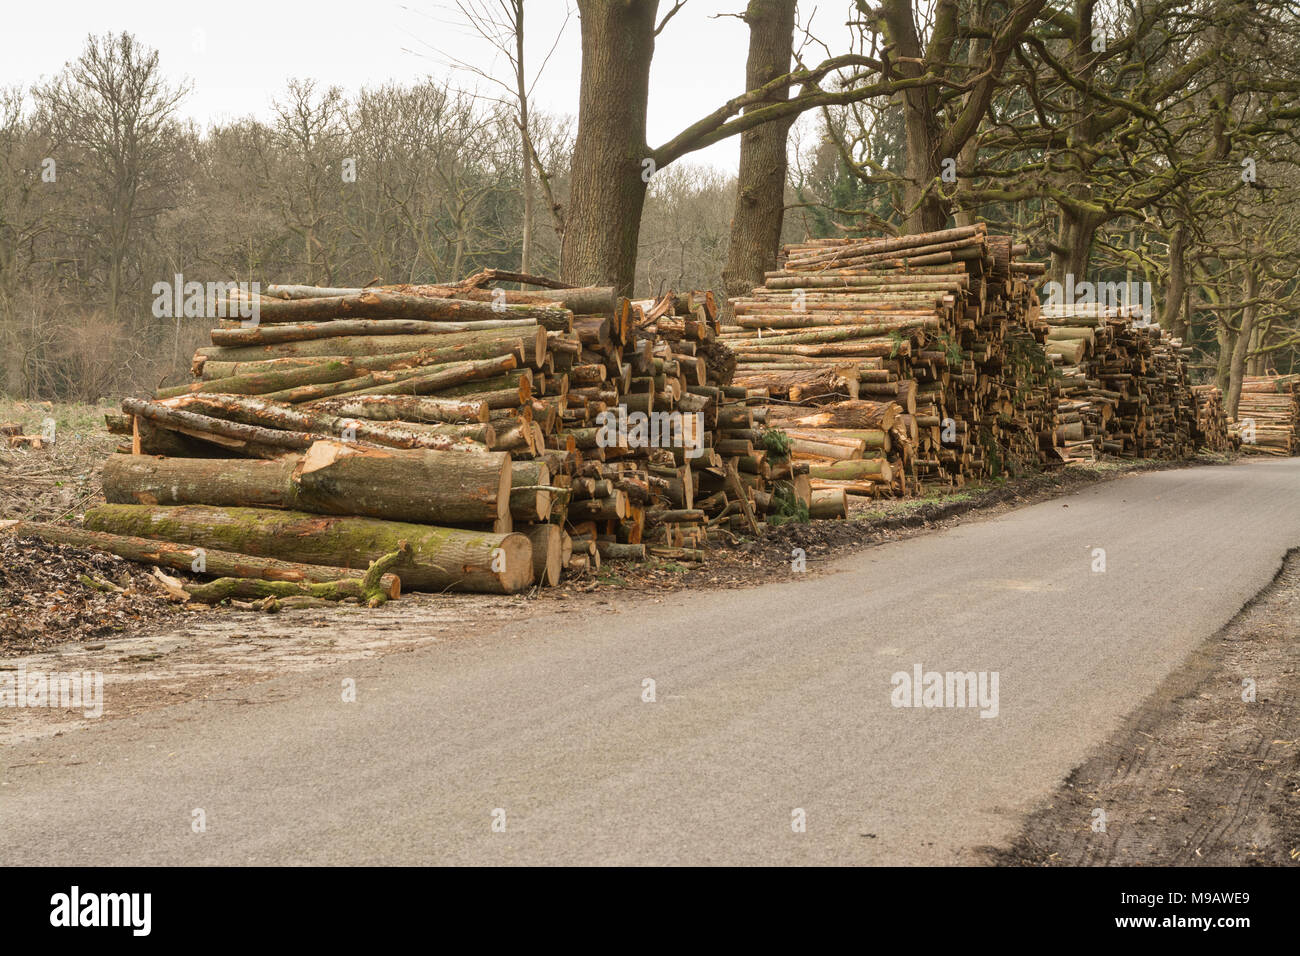 Timber stacks along the edge of a road after clear felling Stock Photo